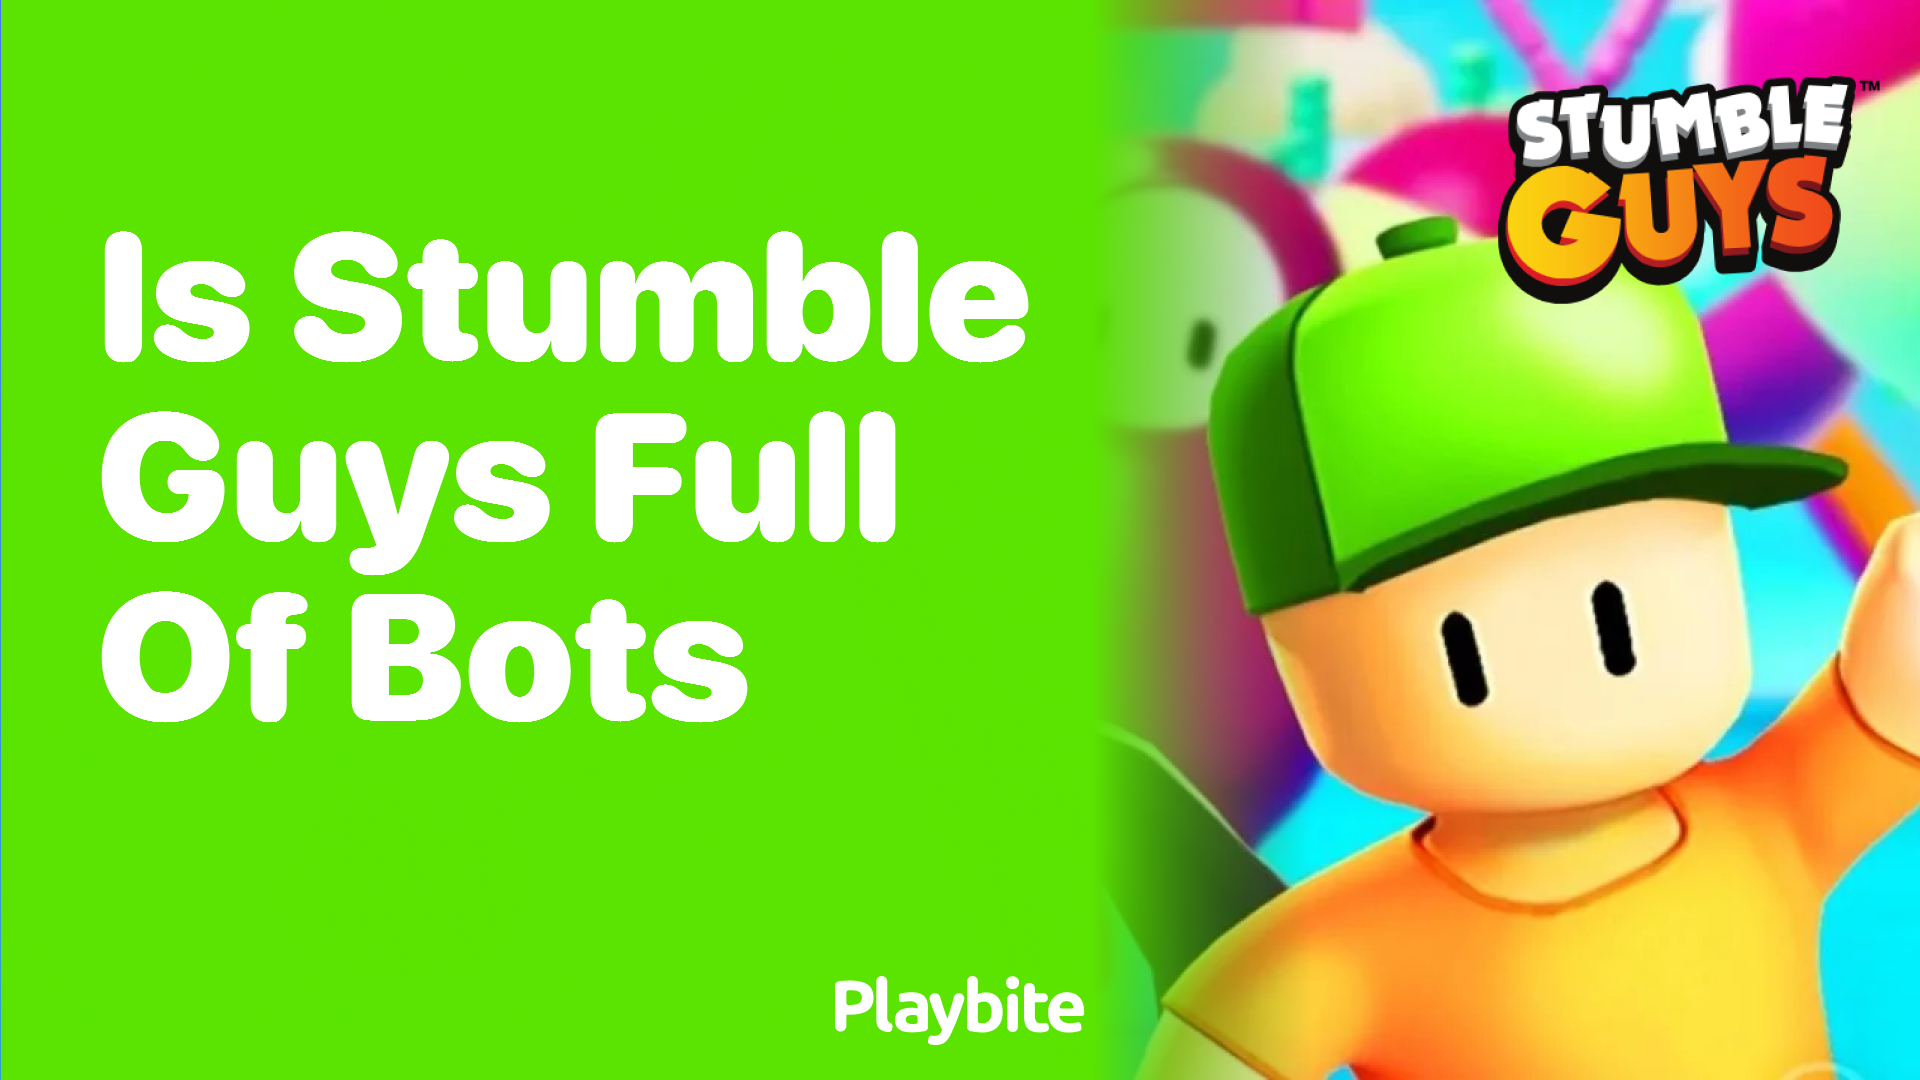 Is Stumble Guys Full of Bots? Unveiling the Truth